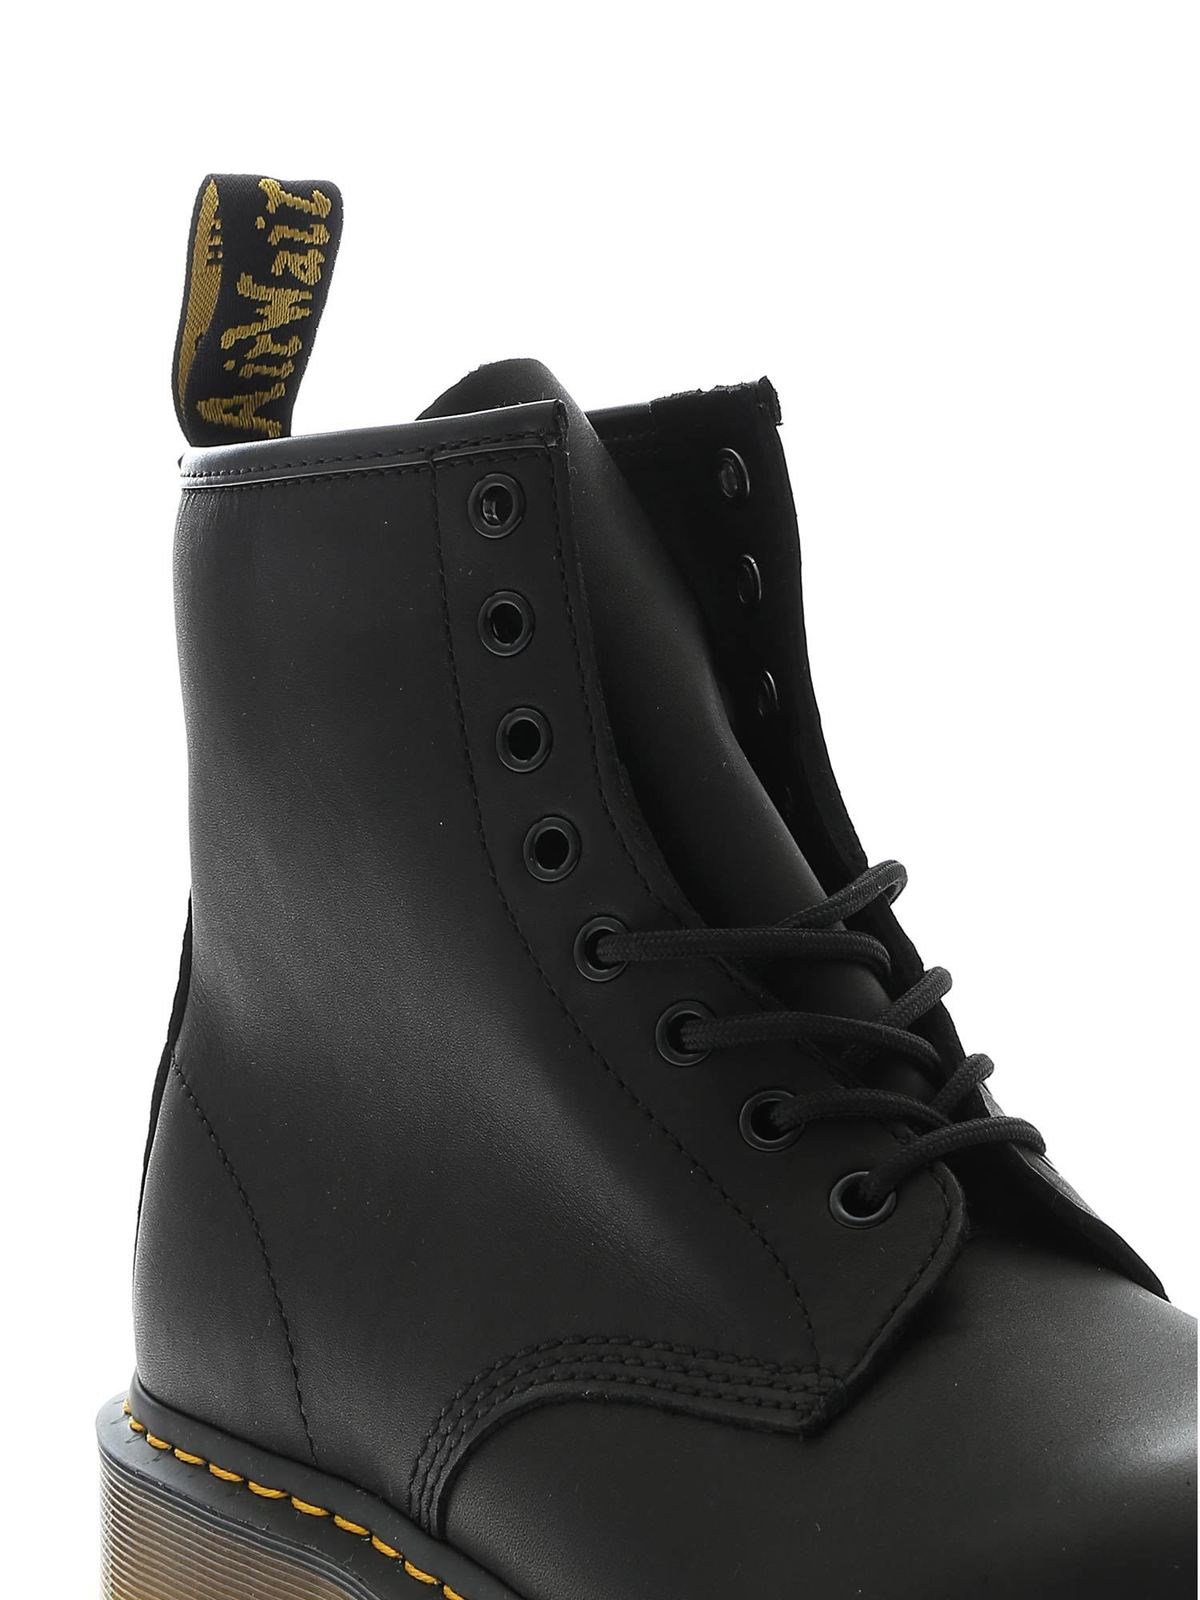 Ankle Boots Dr. Martens - 1460 Greasy Ankle Boots - 11822003(Man)